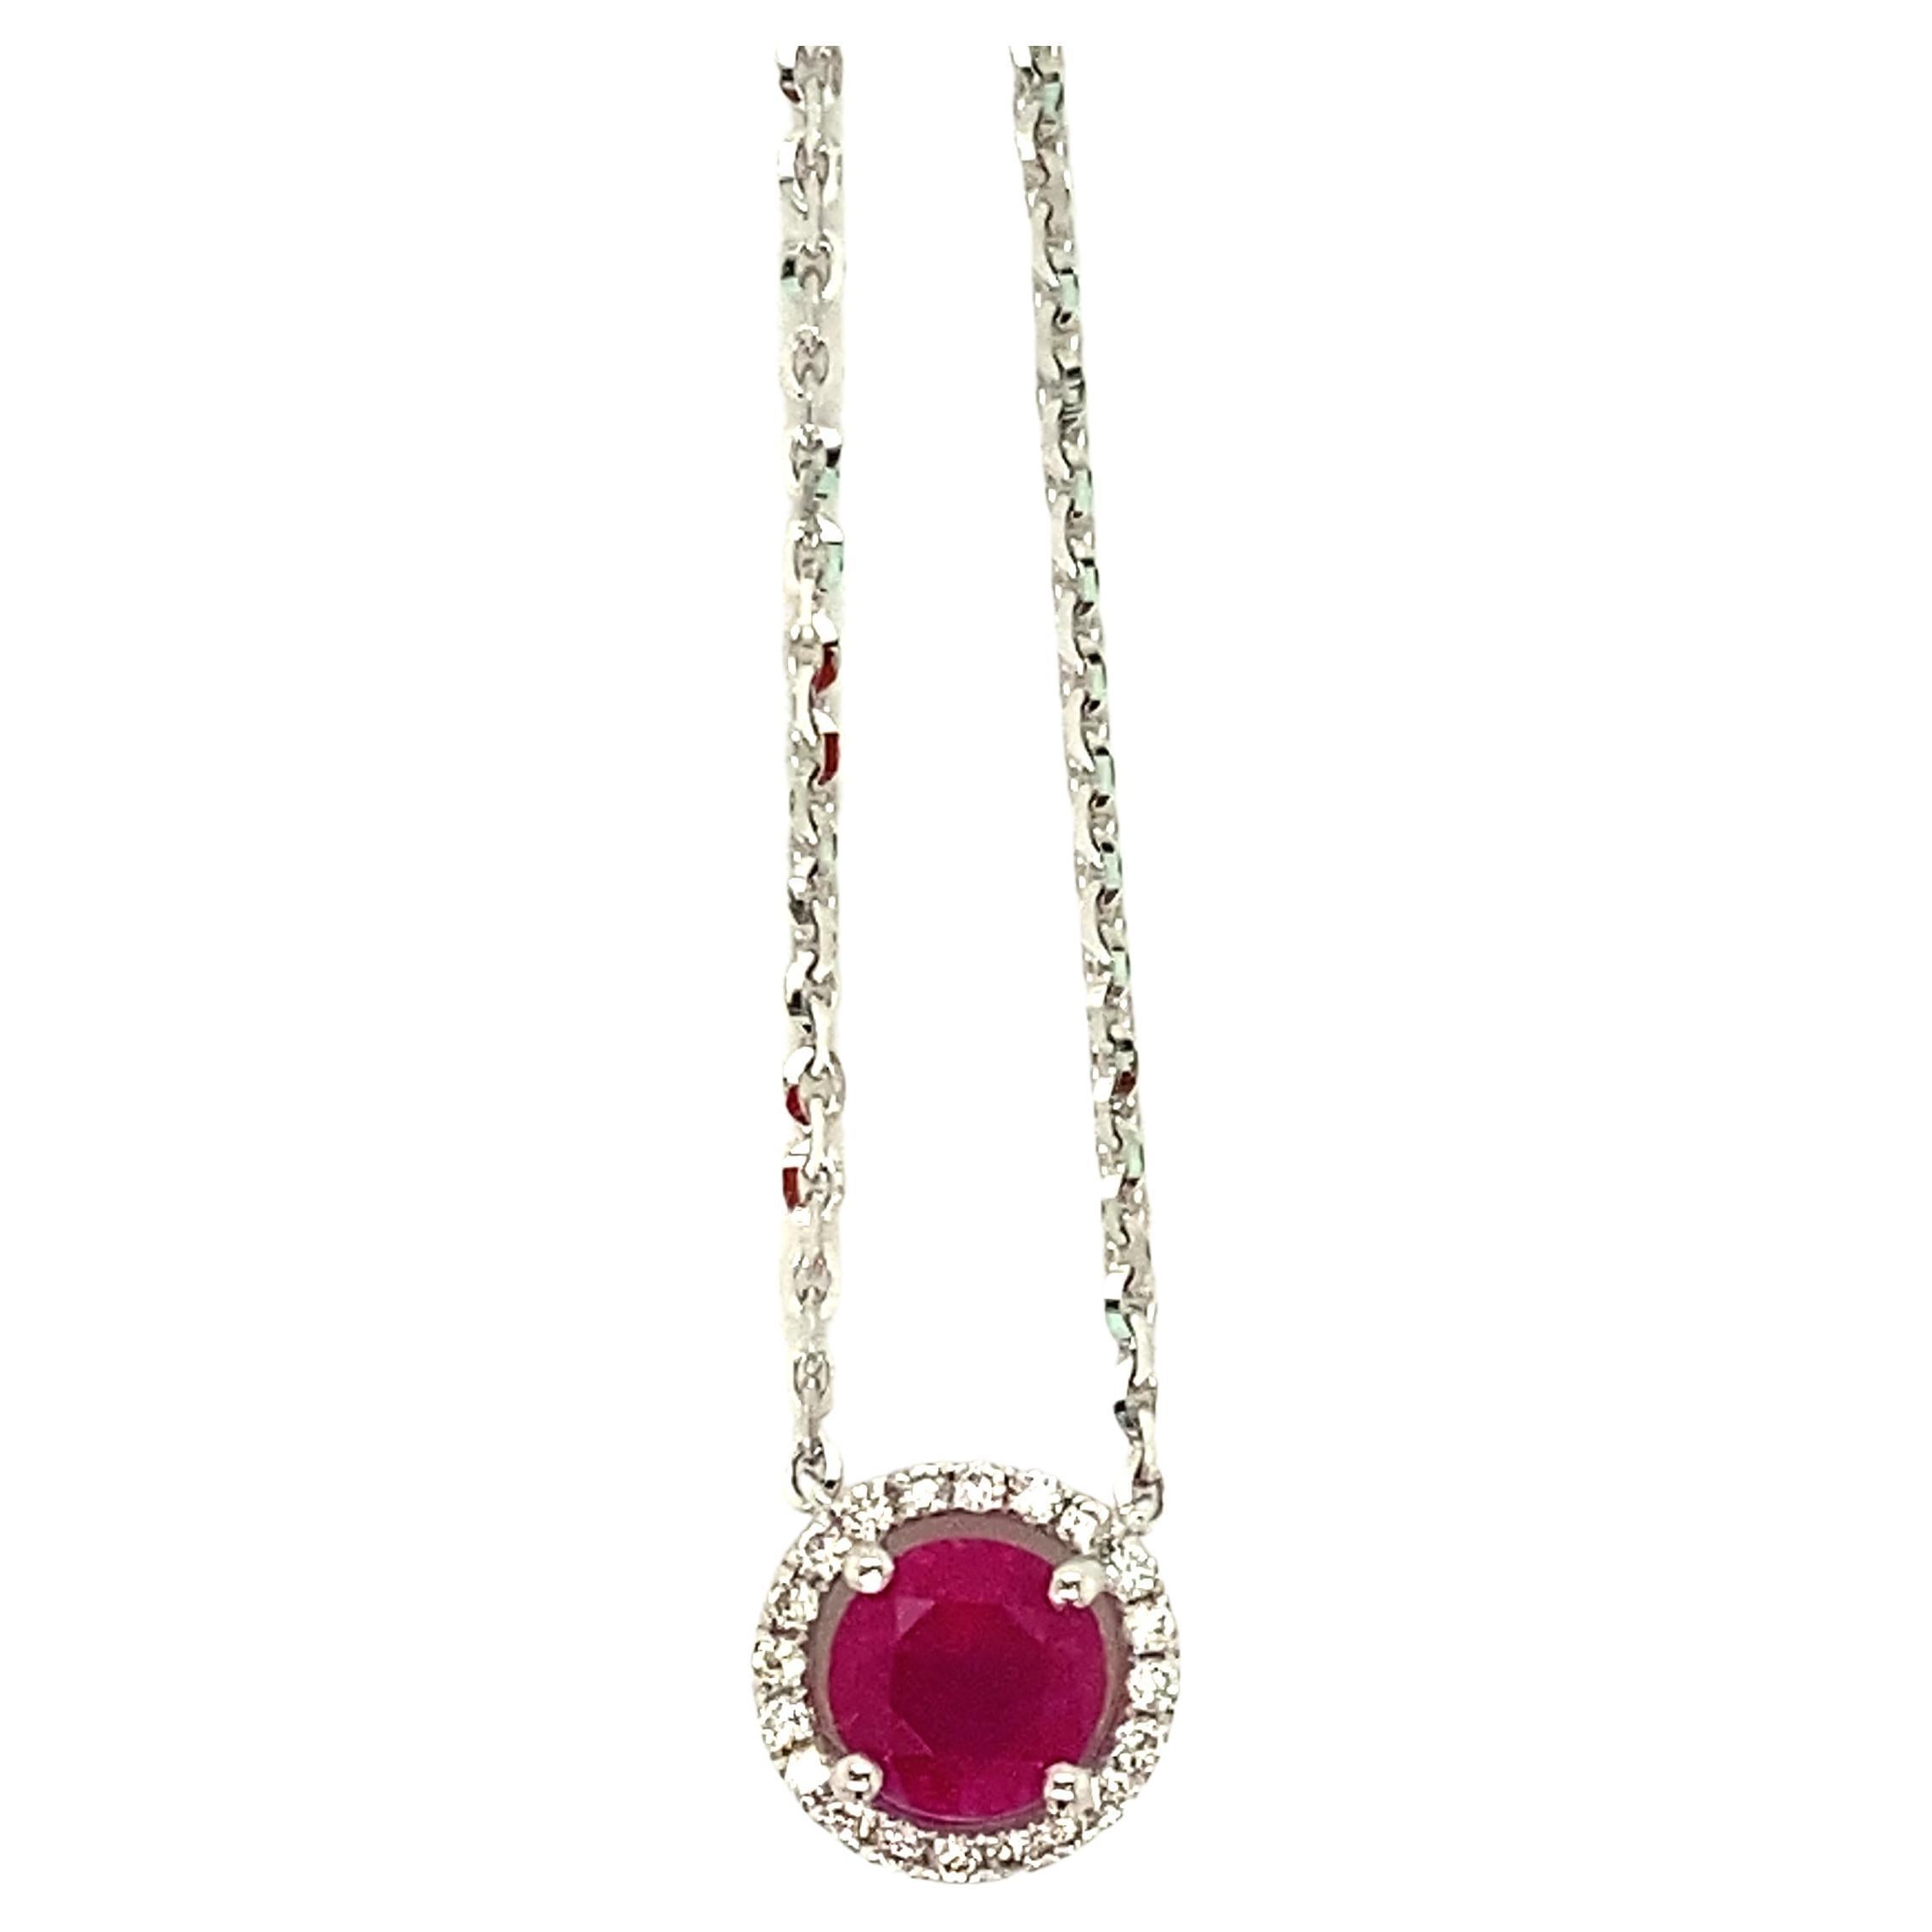 1.16 Carat Round-Cut Intense Ruby and Diamond Pendant Necklace For Sale